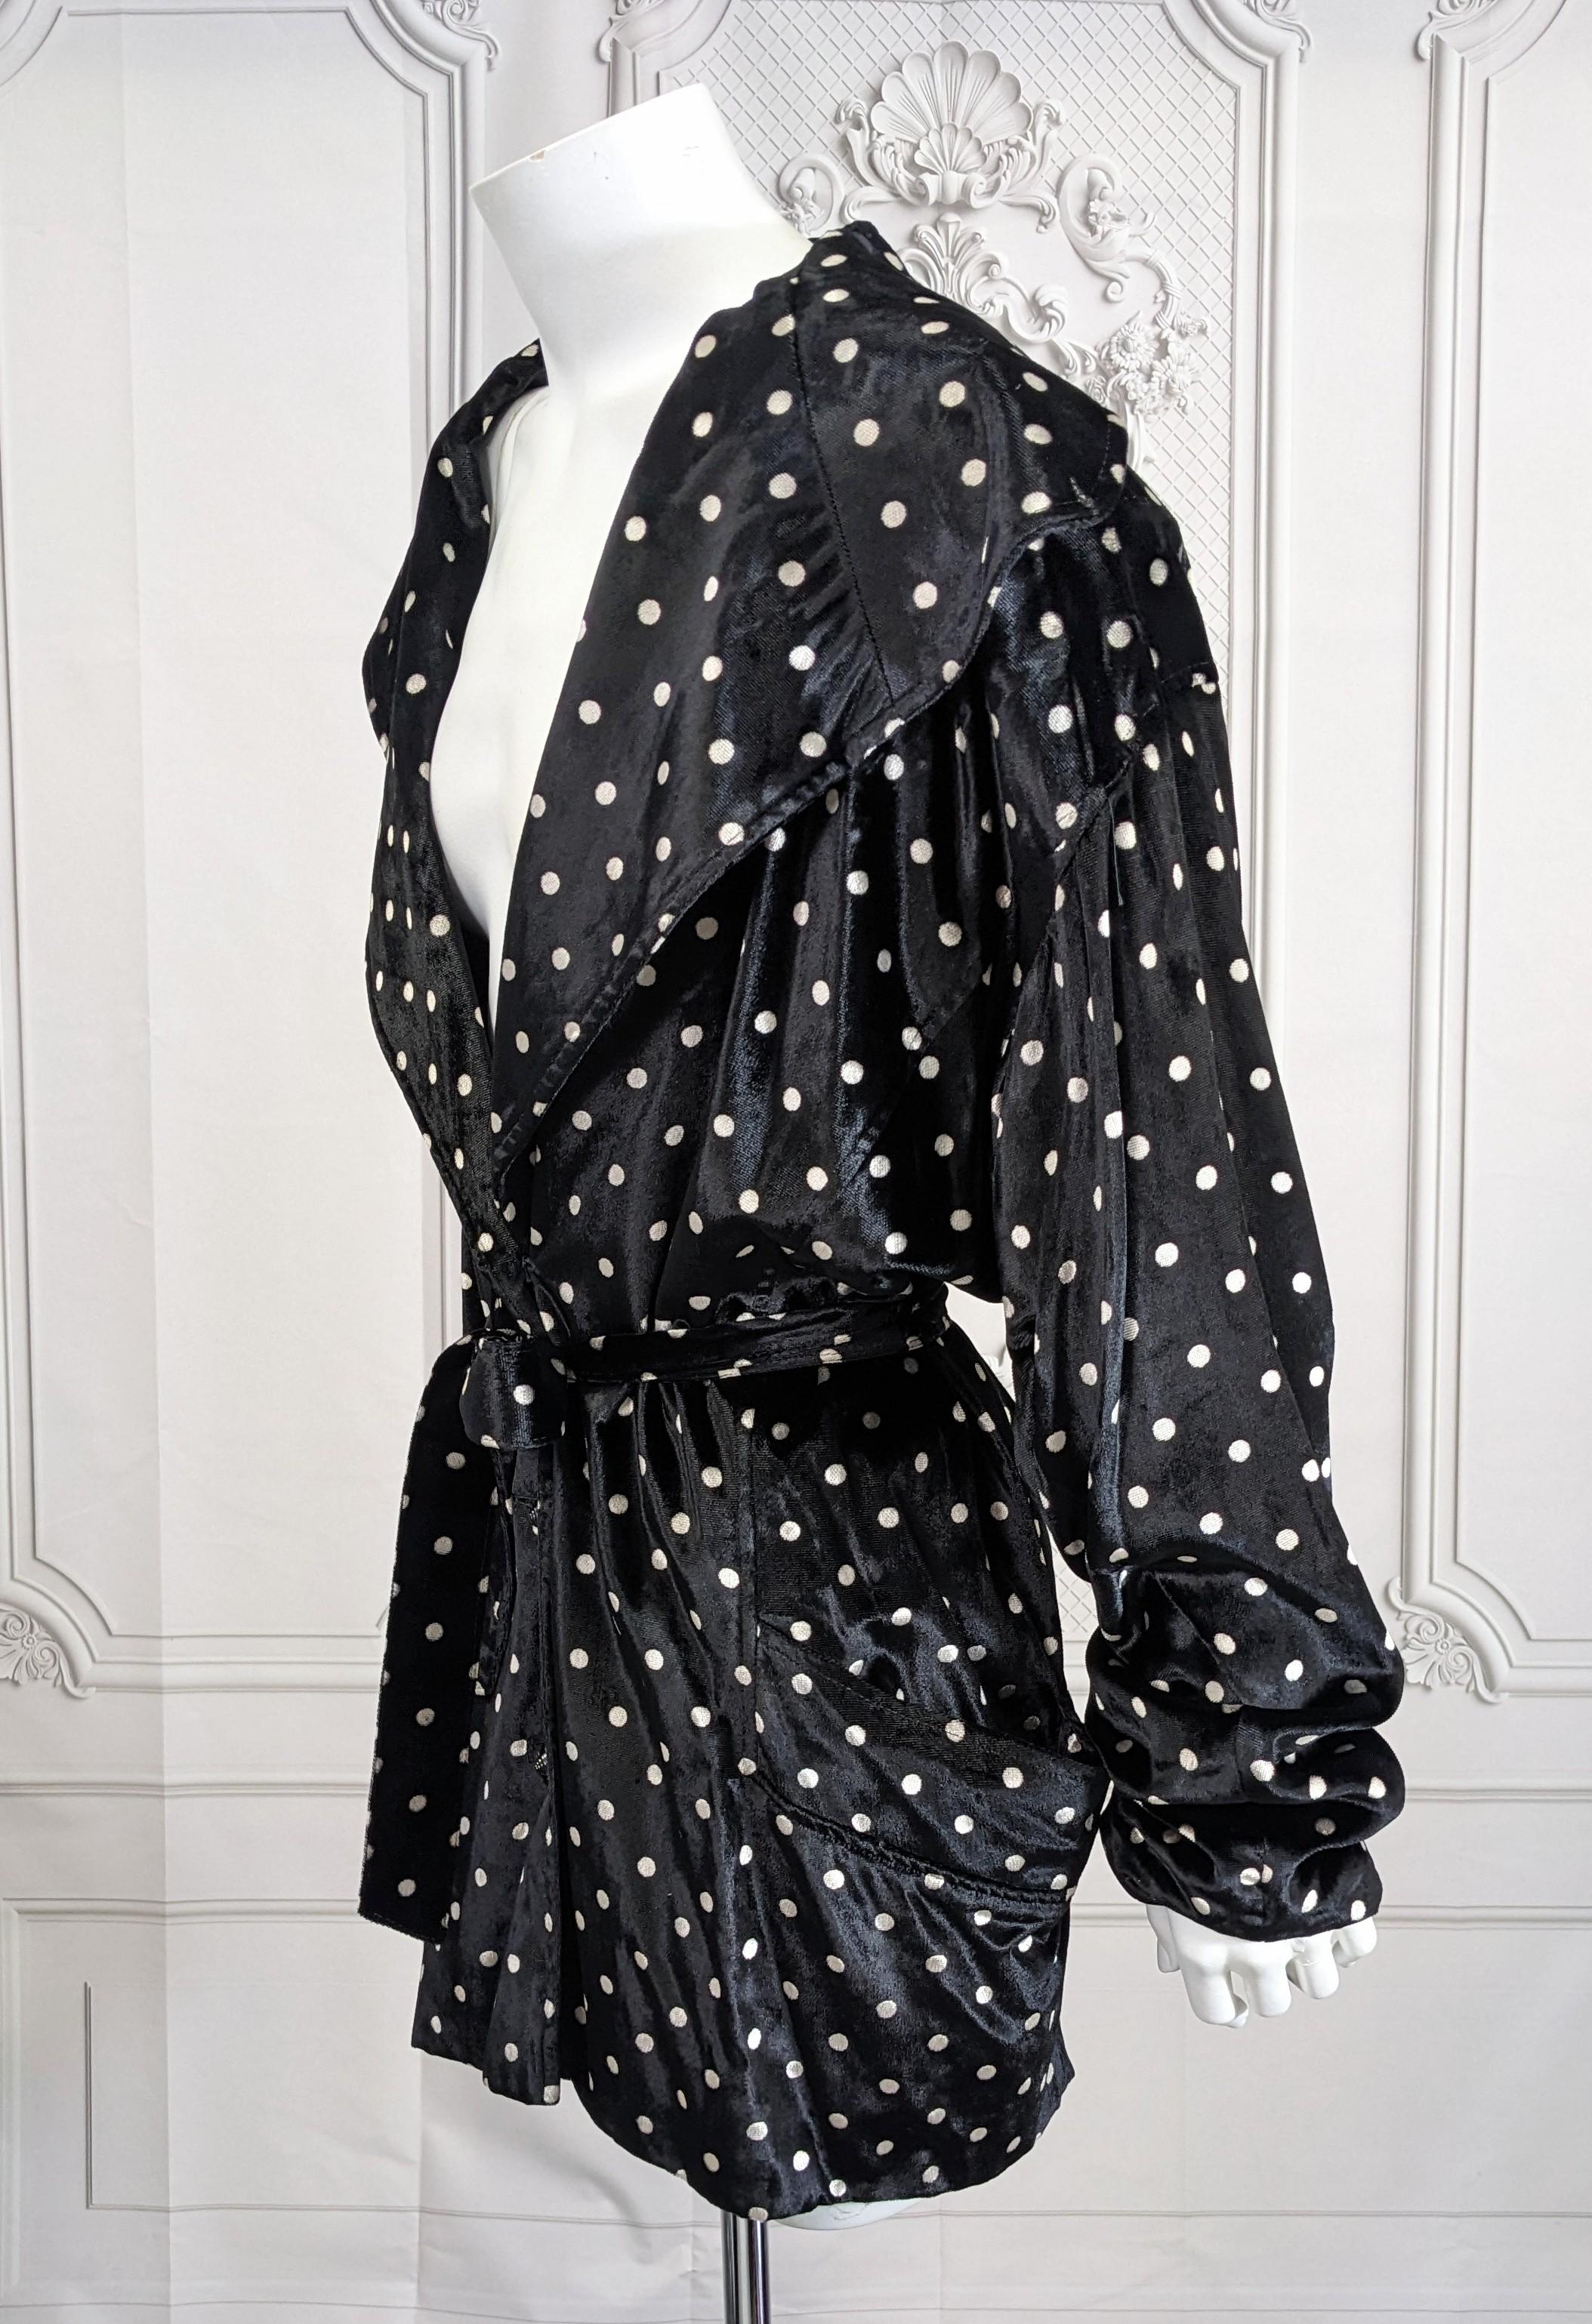 Ungaro Velvet Polka Dot Evening Jacket  In Excellent Condition For Sale In New York, NY